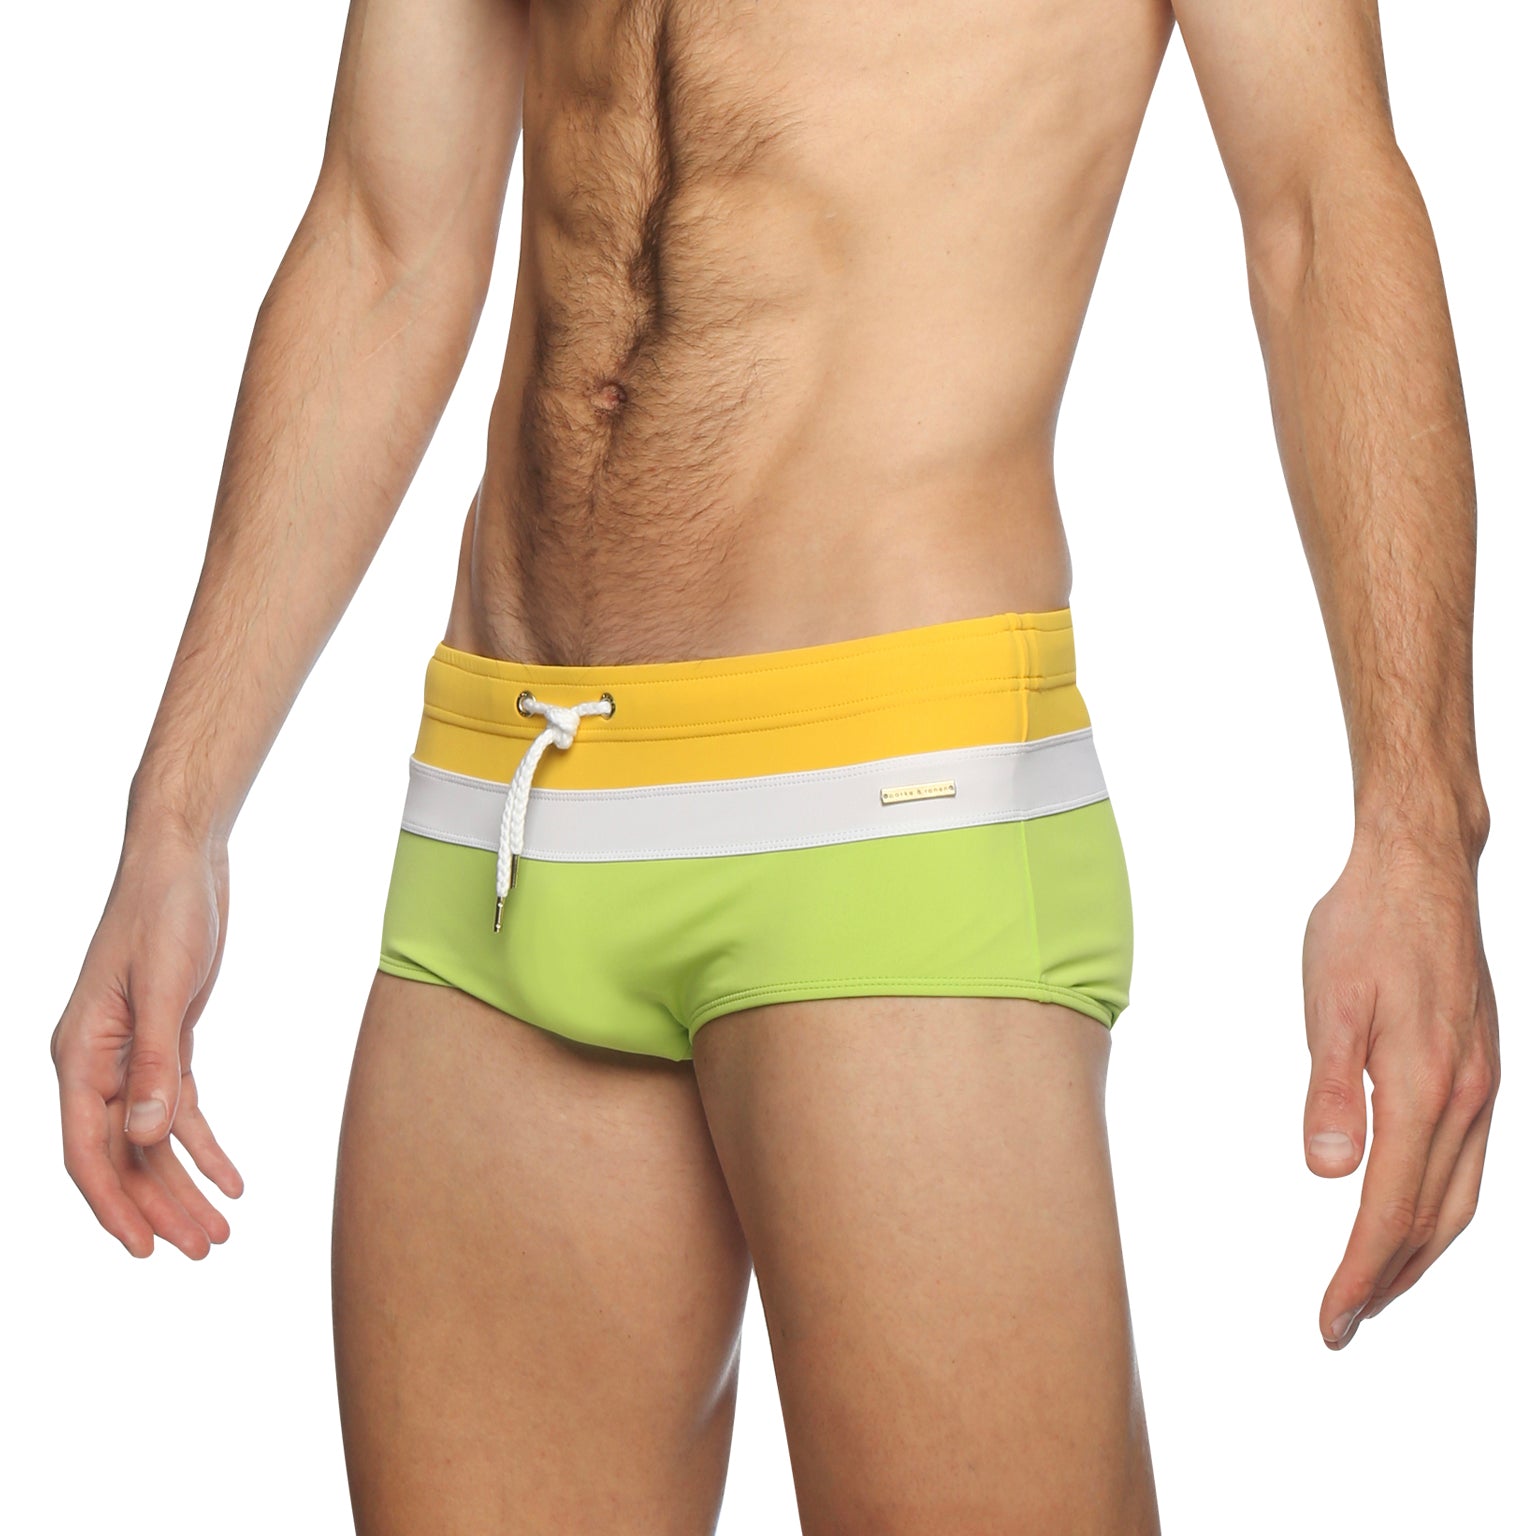 RESORT '24- Sunflower/Lime Colorblock Corcovado Brief